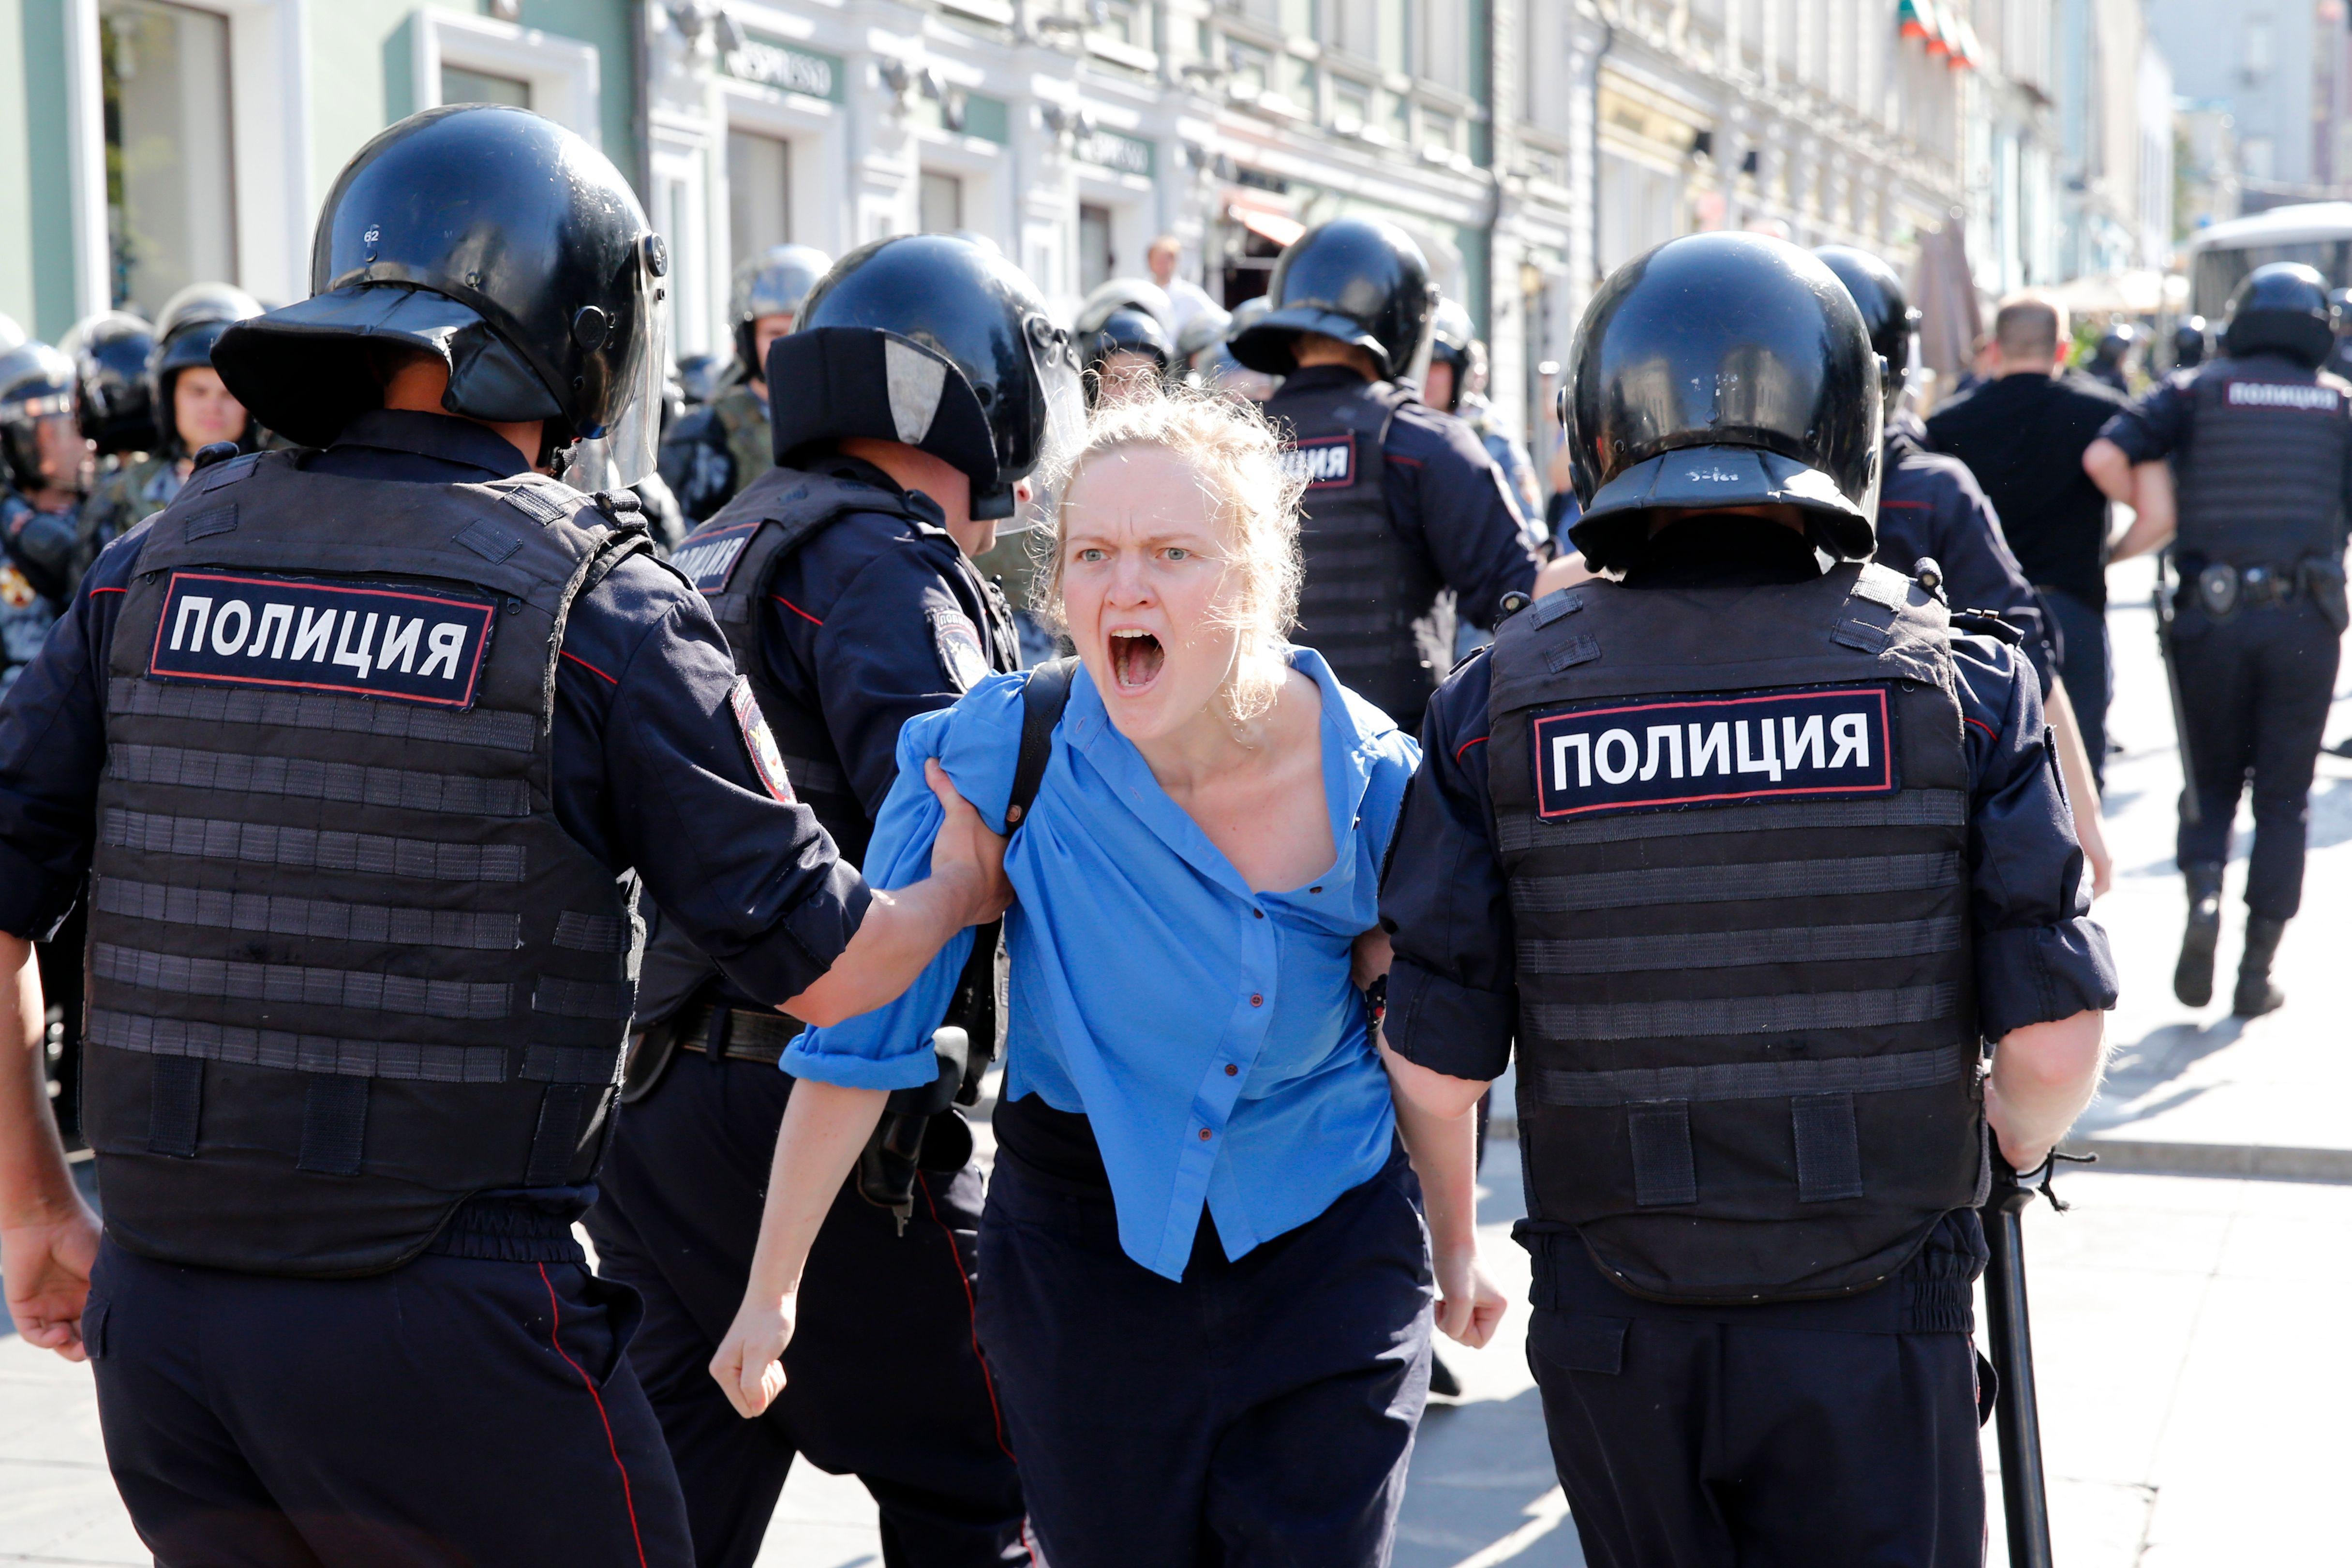 Police officers detain a protester during a rally demanding independent and opposition candidates be allowed to run for office in local election in September, in downtown Moscow on July 27, 2019. 